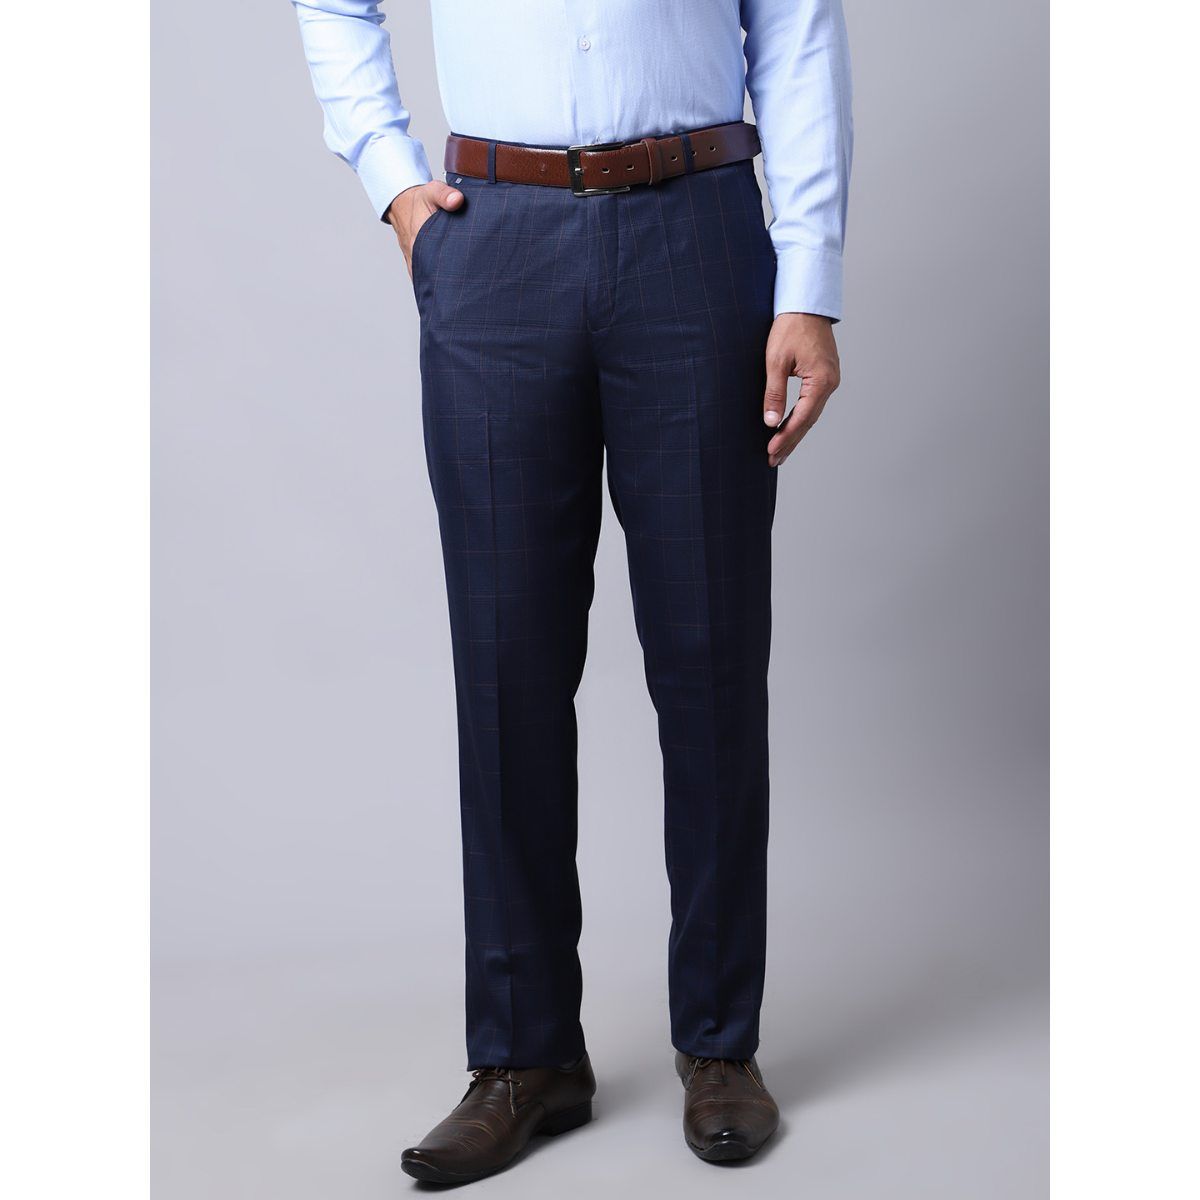 Latest CANTABIL Formal Trousers & Hight Waist Pants arrivals - Men - 5  products | FASHIOLA INDIA